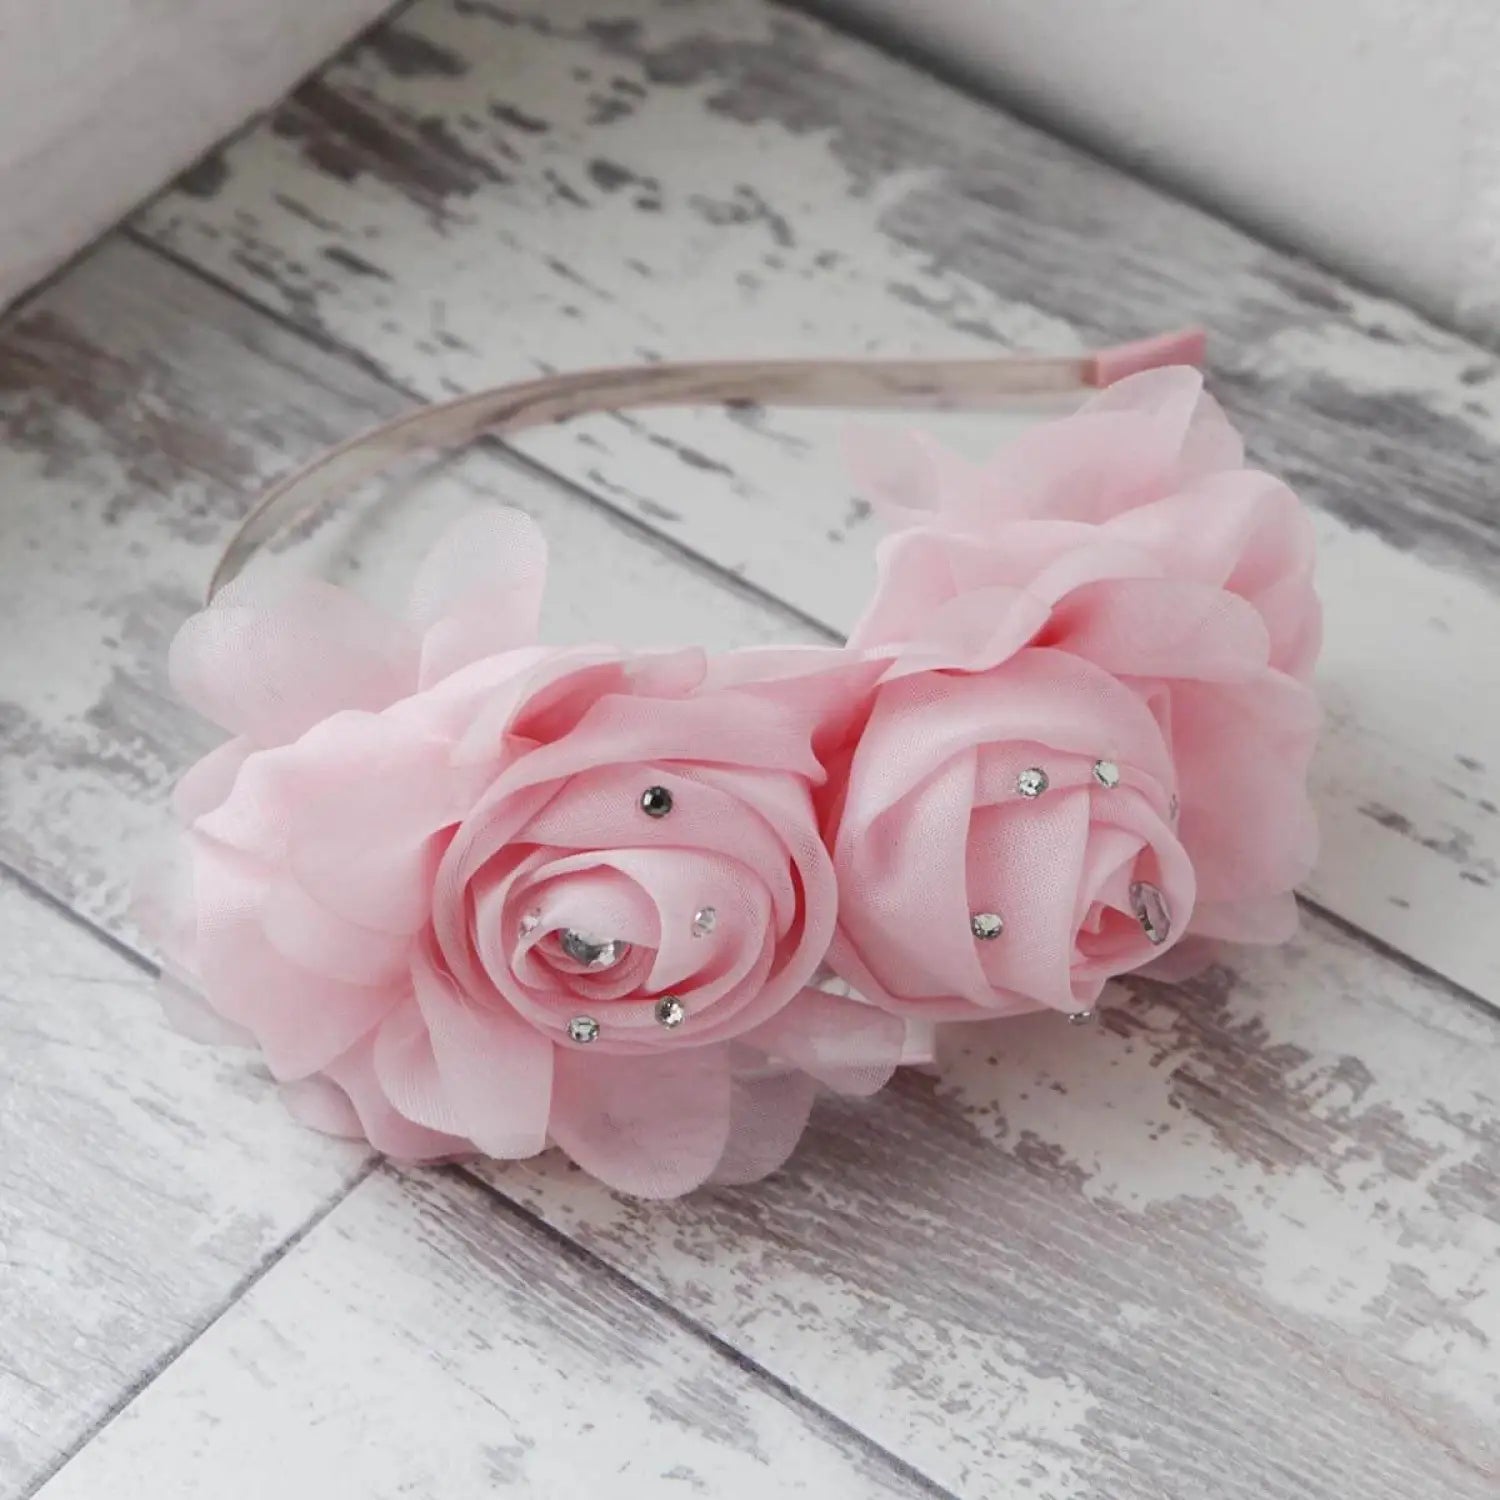 Chiffon 3D Realistic Rose Headband with Pearls and Crystals